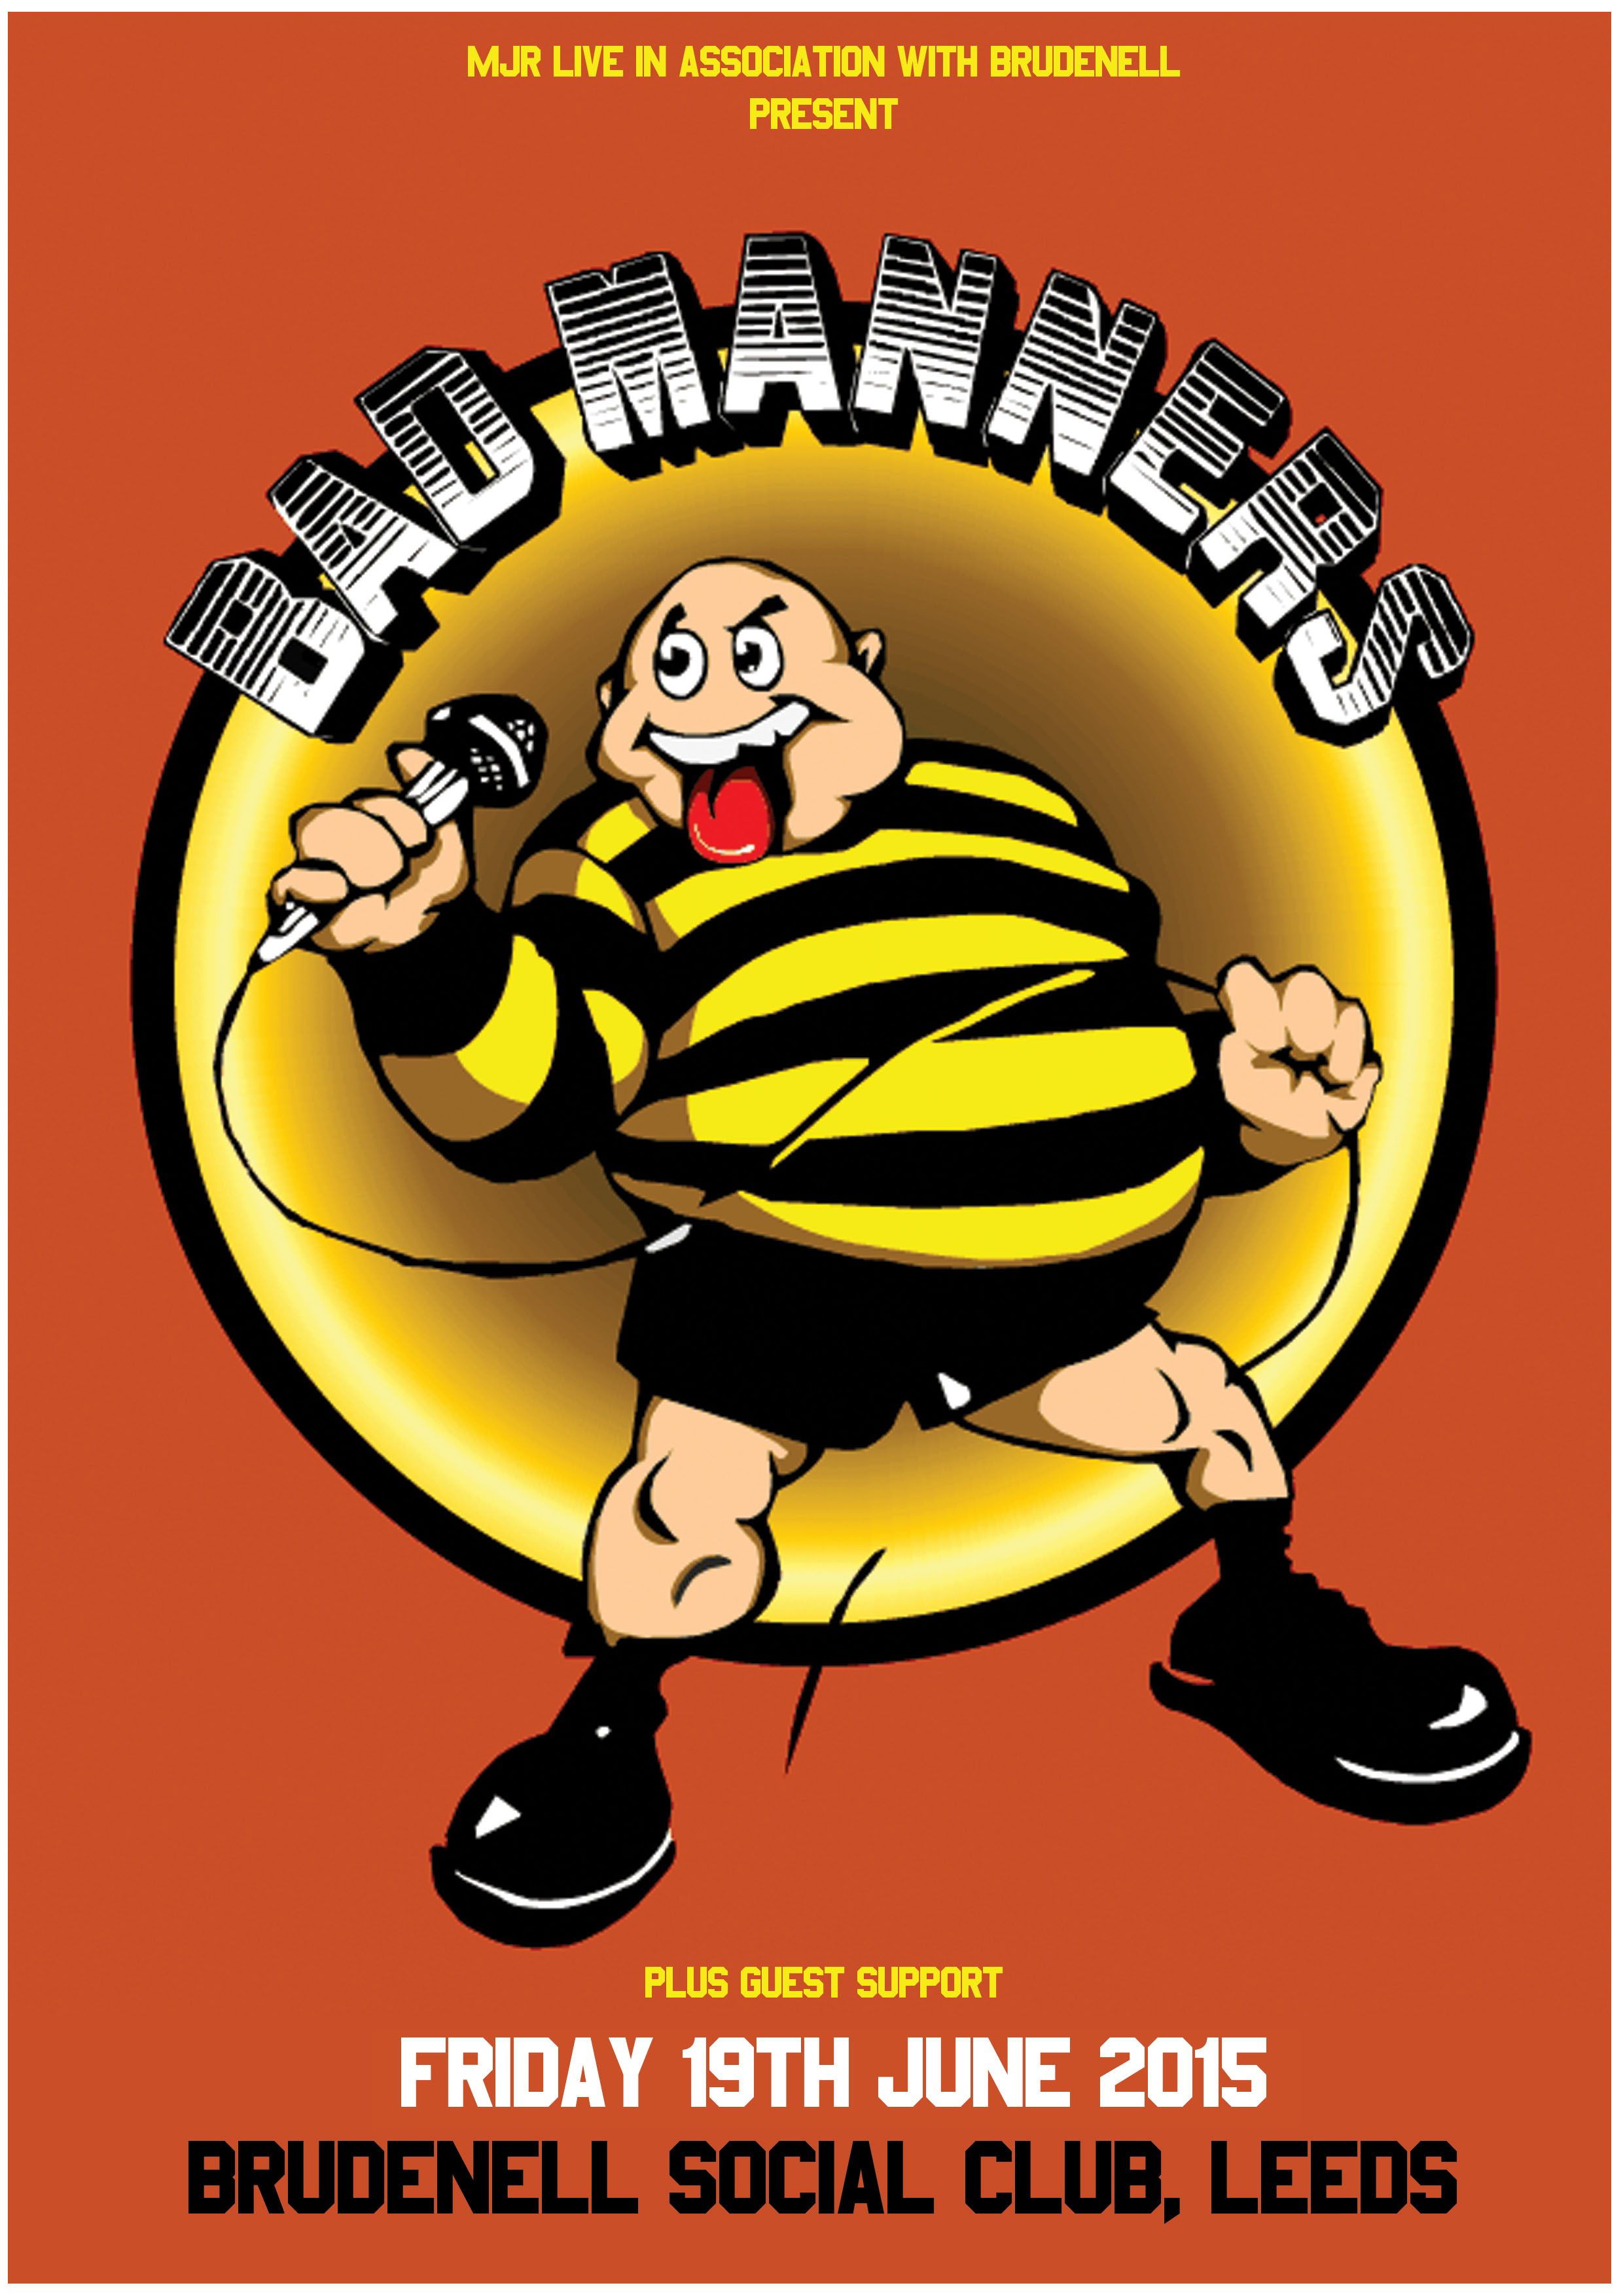 Bad manners gig dates